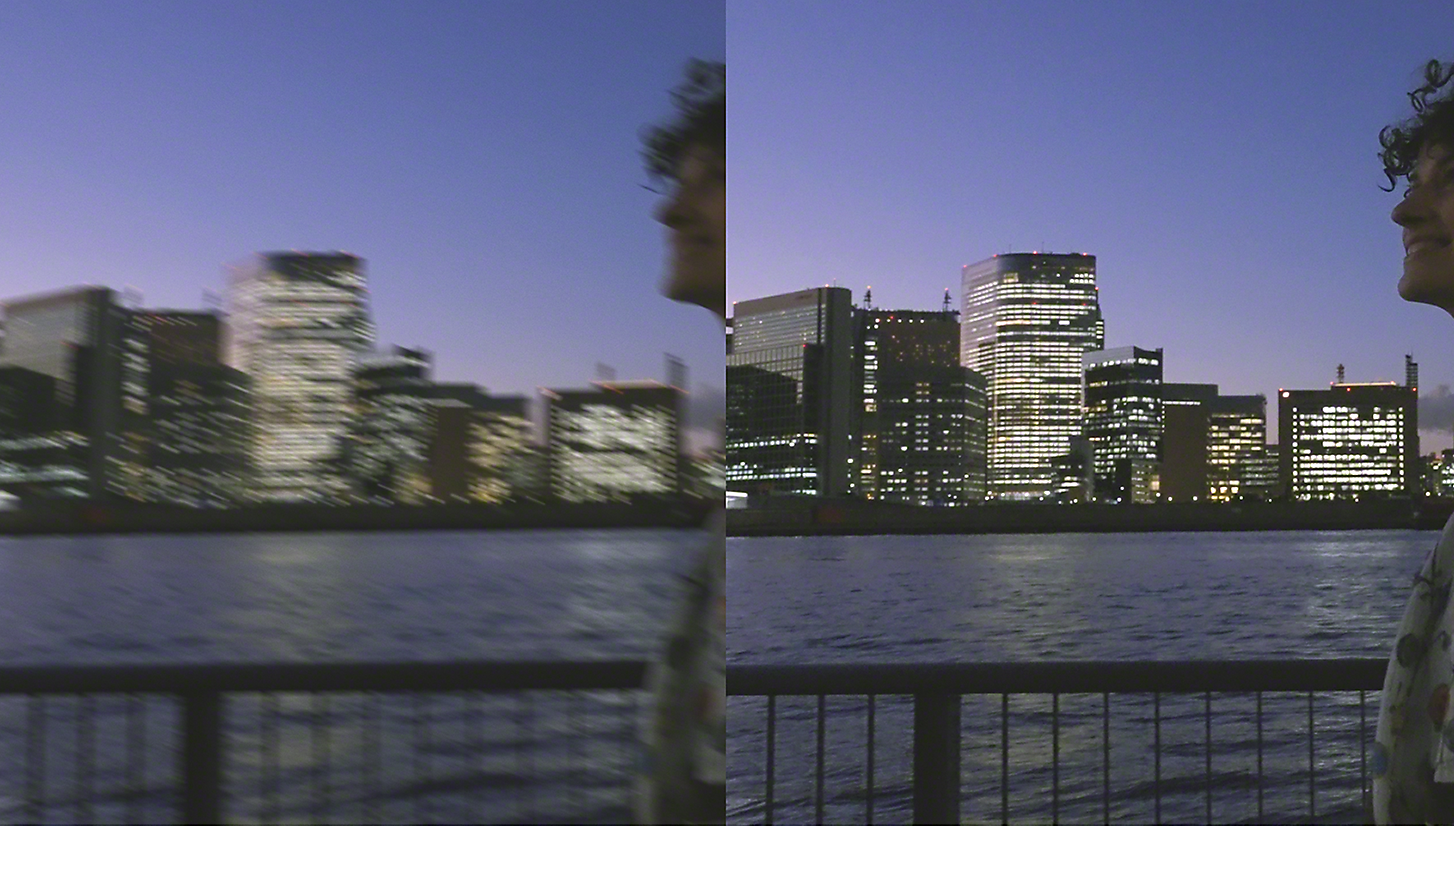 Dual image of a cityscape at night, the left image is blurry, the right is crisp and sharp